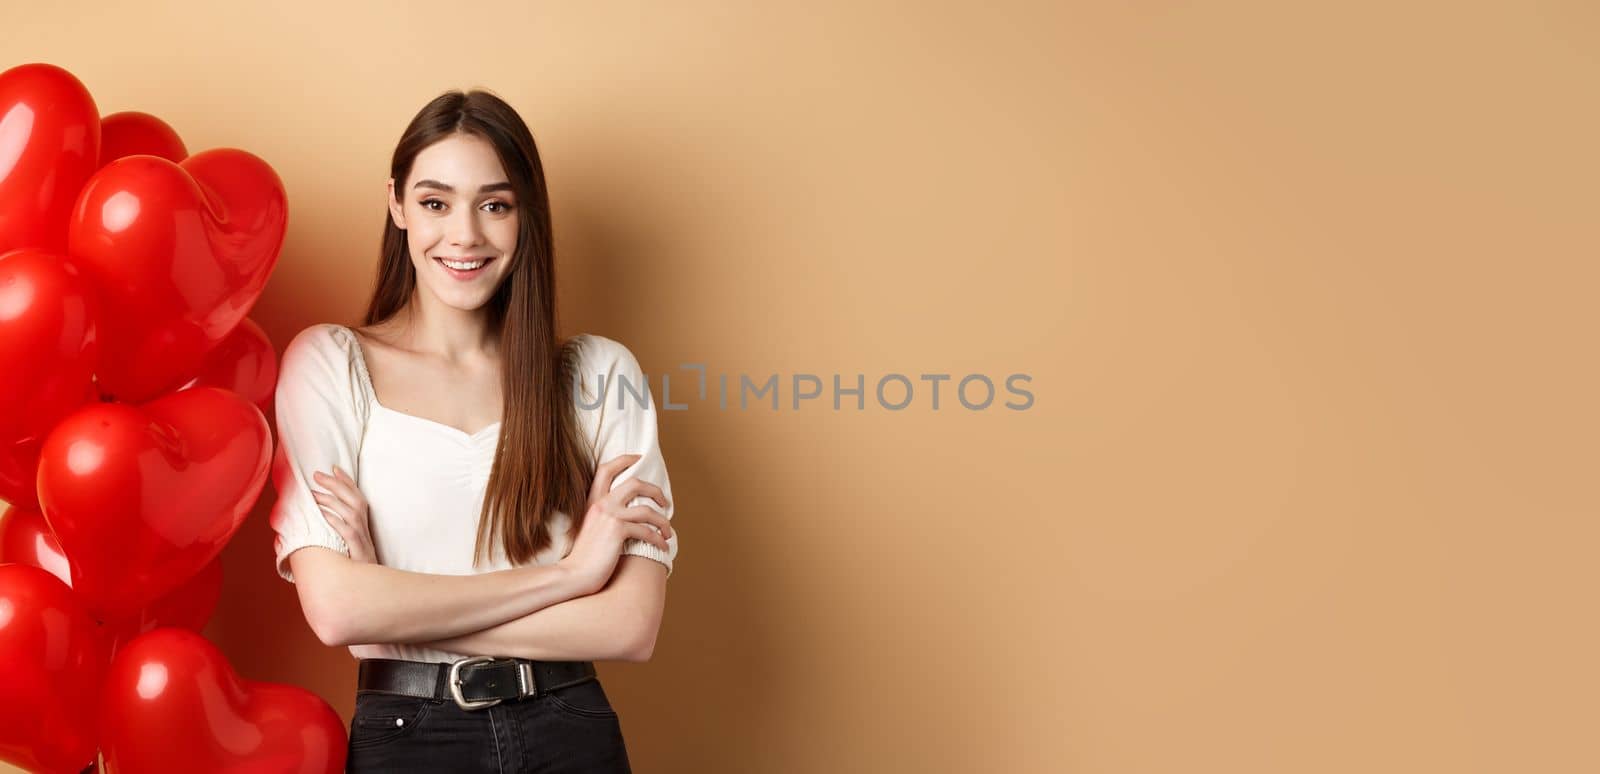 Cheerful young woman looking happy on Valentines day, standing near hearts balloons with arms crossed, smiling at camera, standing on beige background.